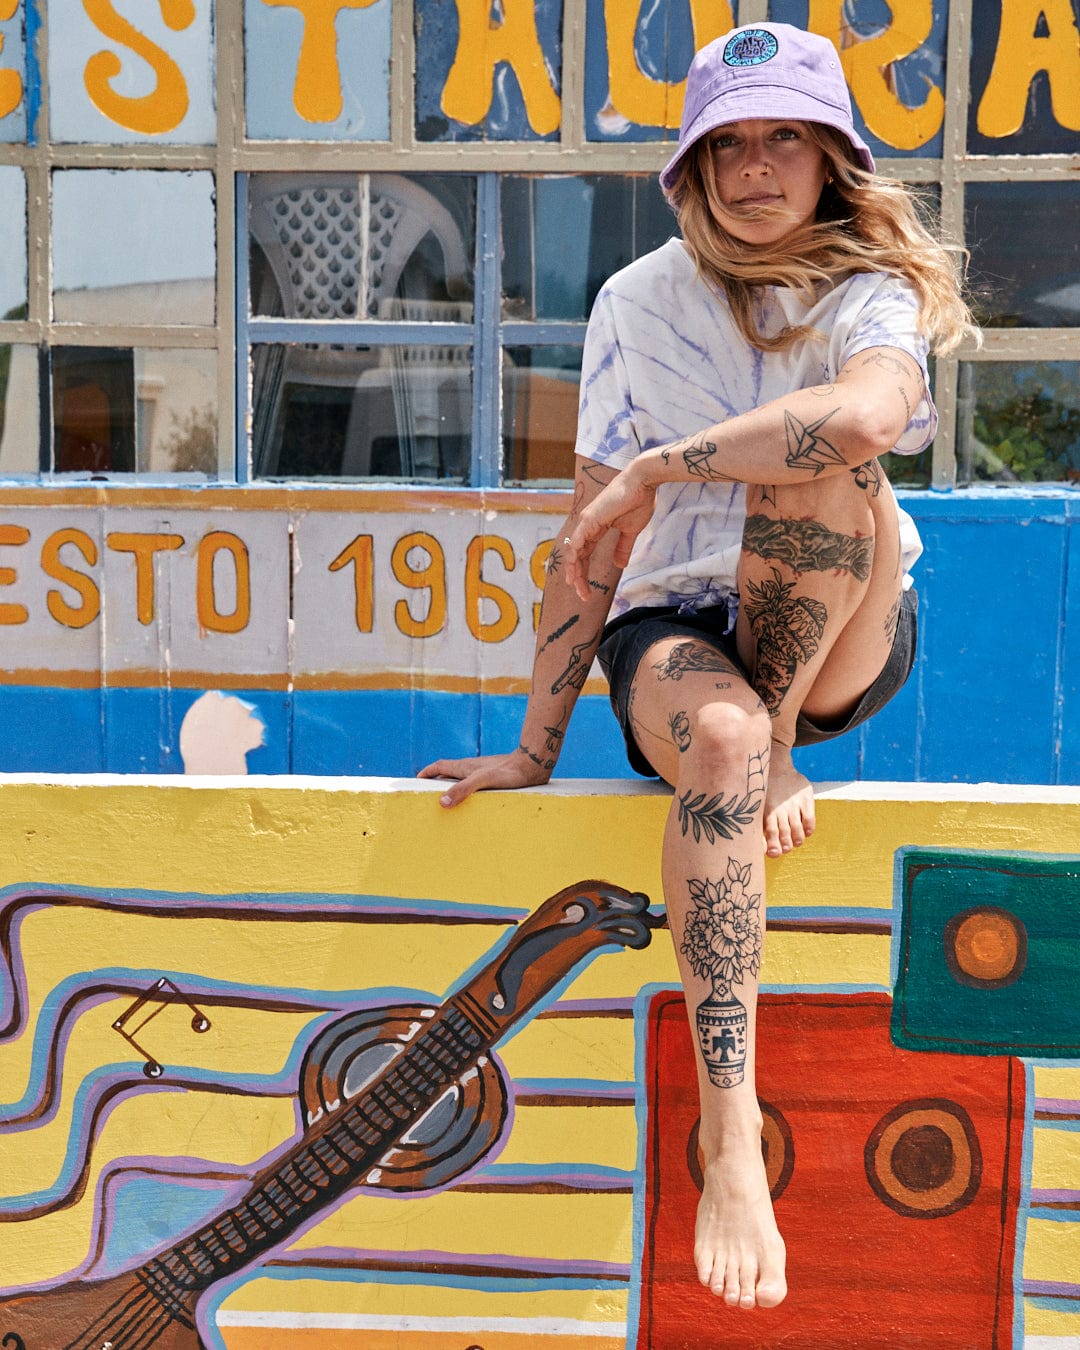 A woman with tattoos sits on a colorful painted ledge in front of a window with the text "esto 1966," wearing a lilac cap and a Saltrock Swirl - Women's Short Sleeve T-Shirt - Tie Dye White/Purple.